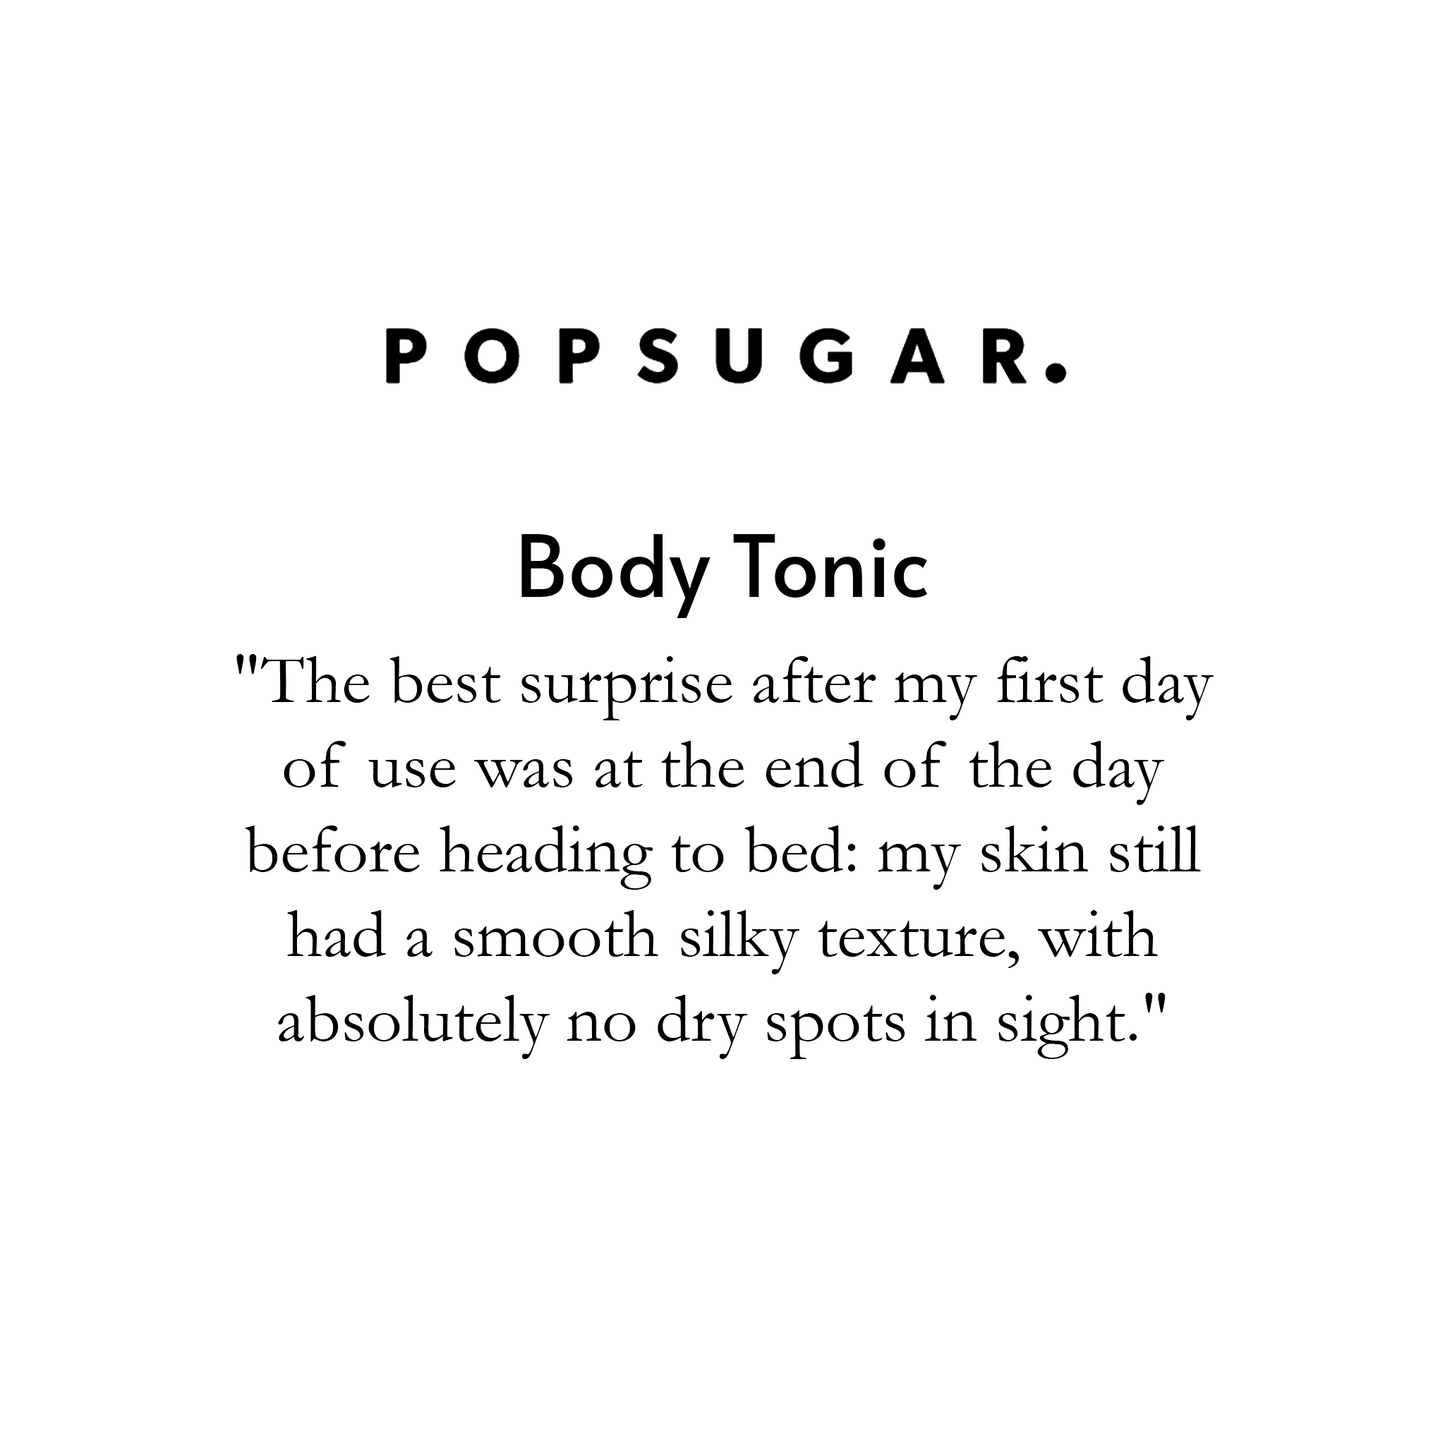 "Pop Sugar Body Tonic. The best surprise after my first day of use was at the end of the day before heading to be: my skin still had a smooth silky texture, with absolutely no dry spots in sight."